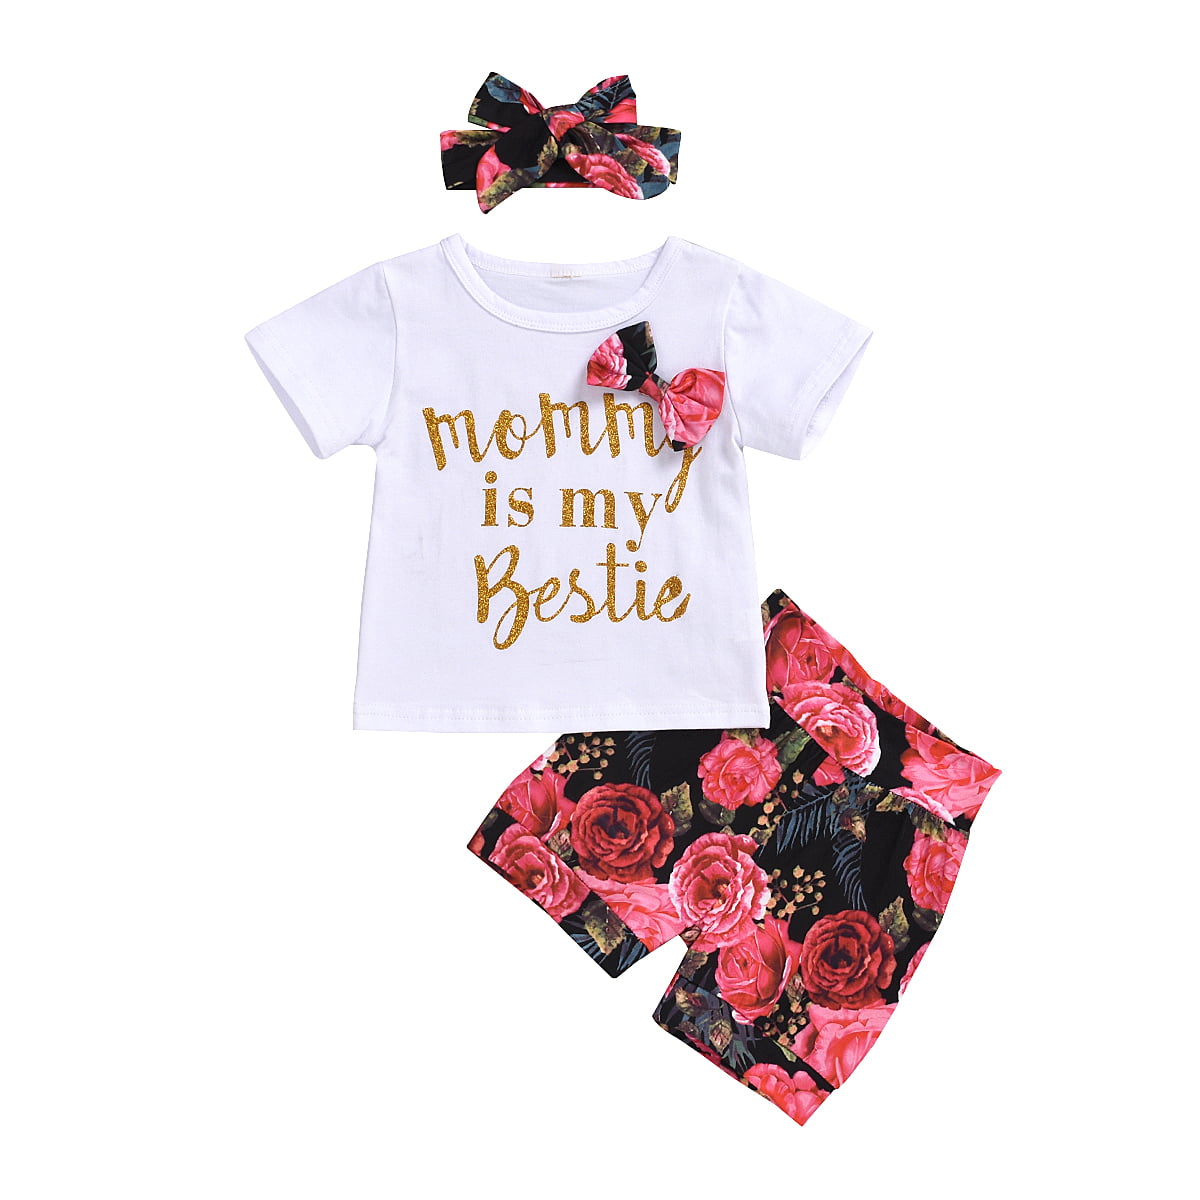 Short Summer Cool Outfit Set Newborn Baby Girl Floral Printed Clothes Set Infant Sleeveless Top